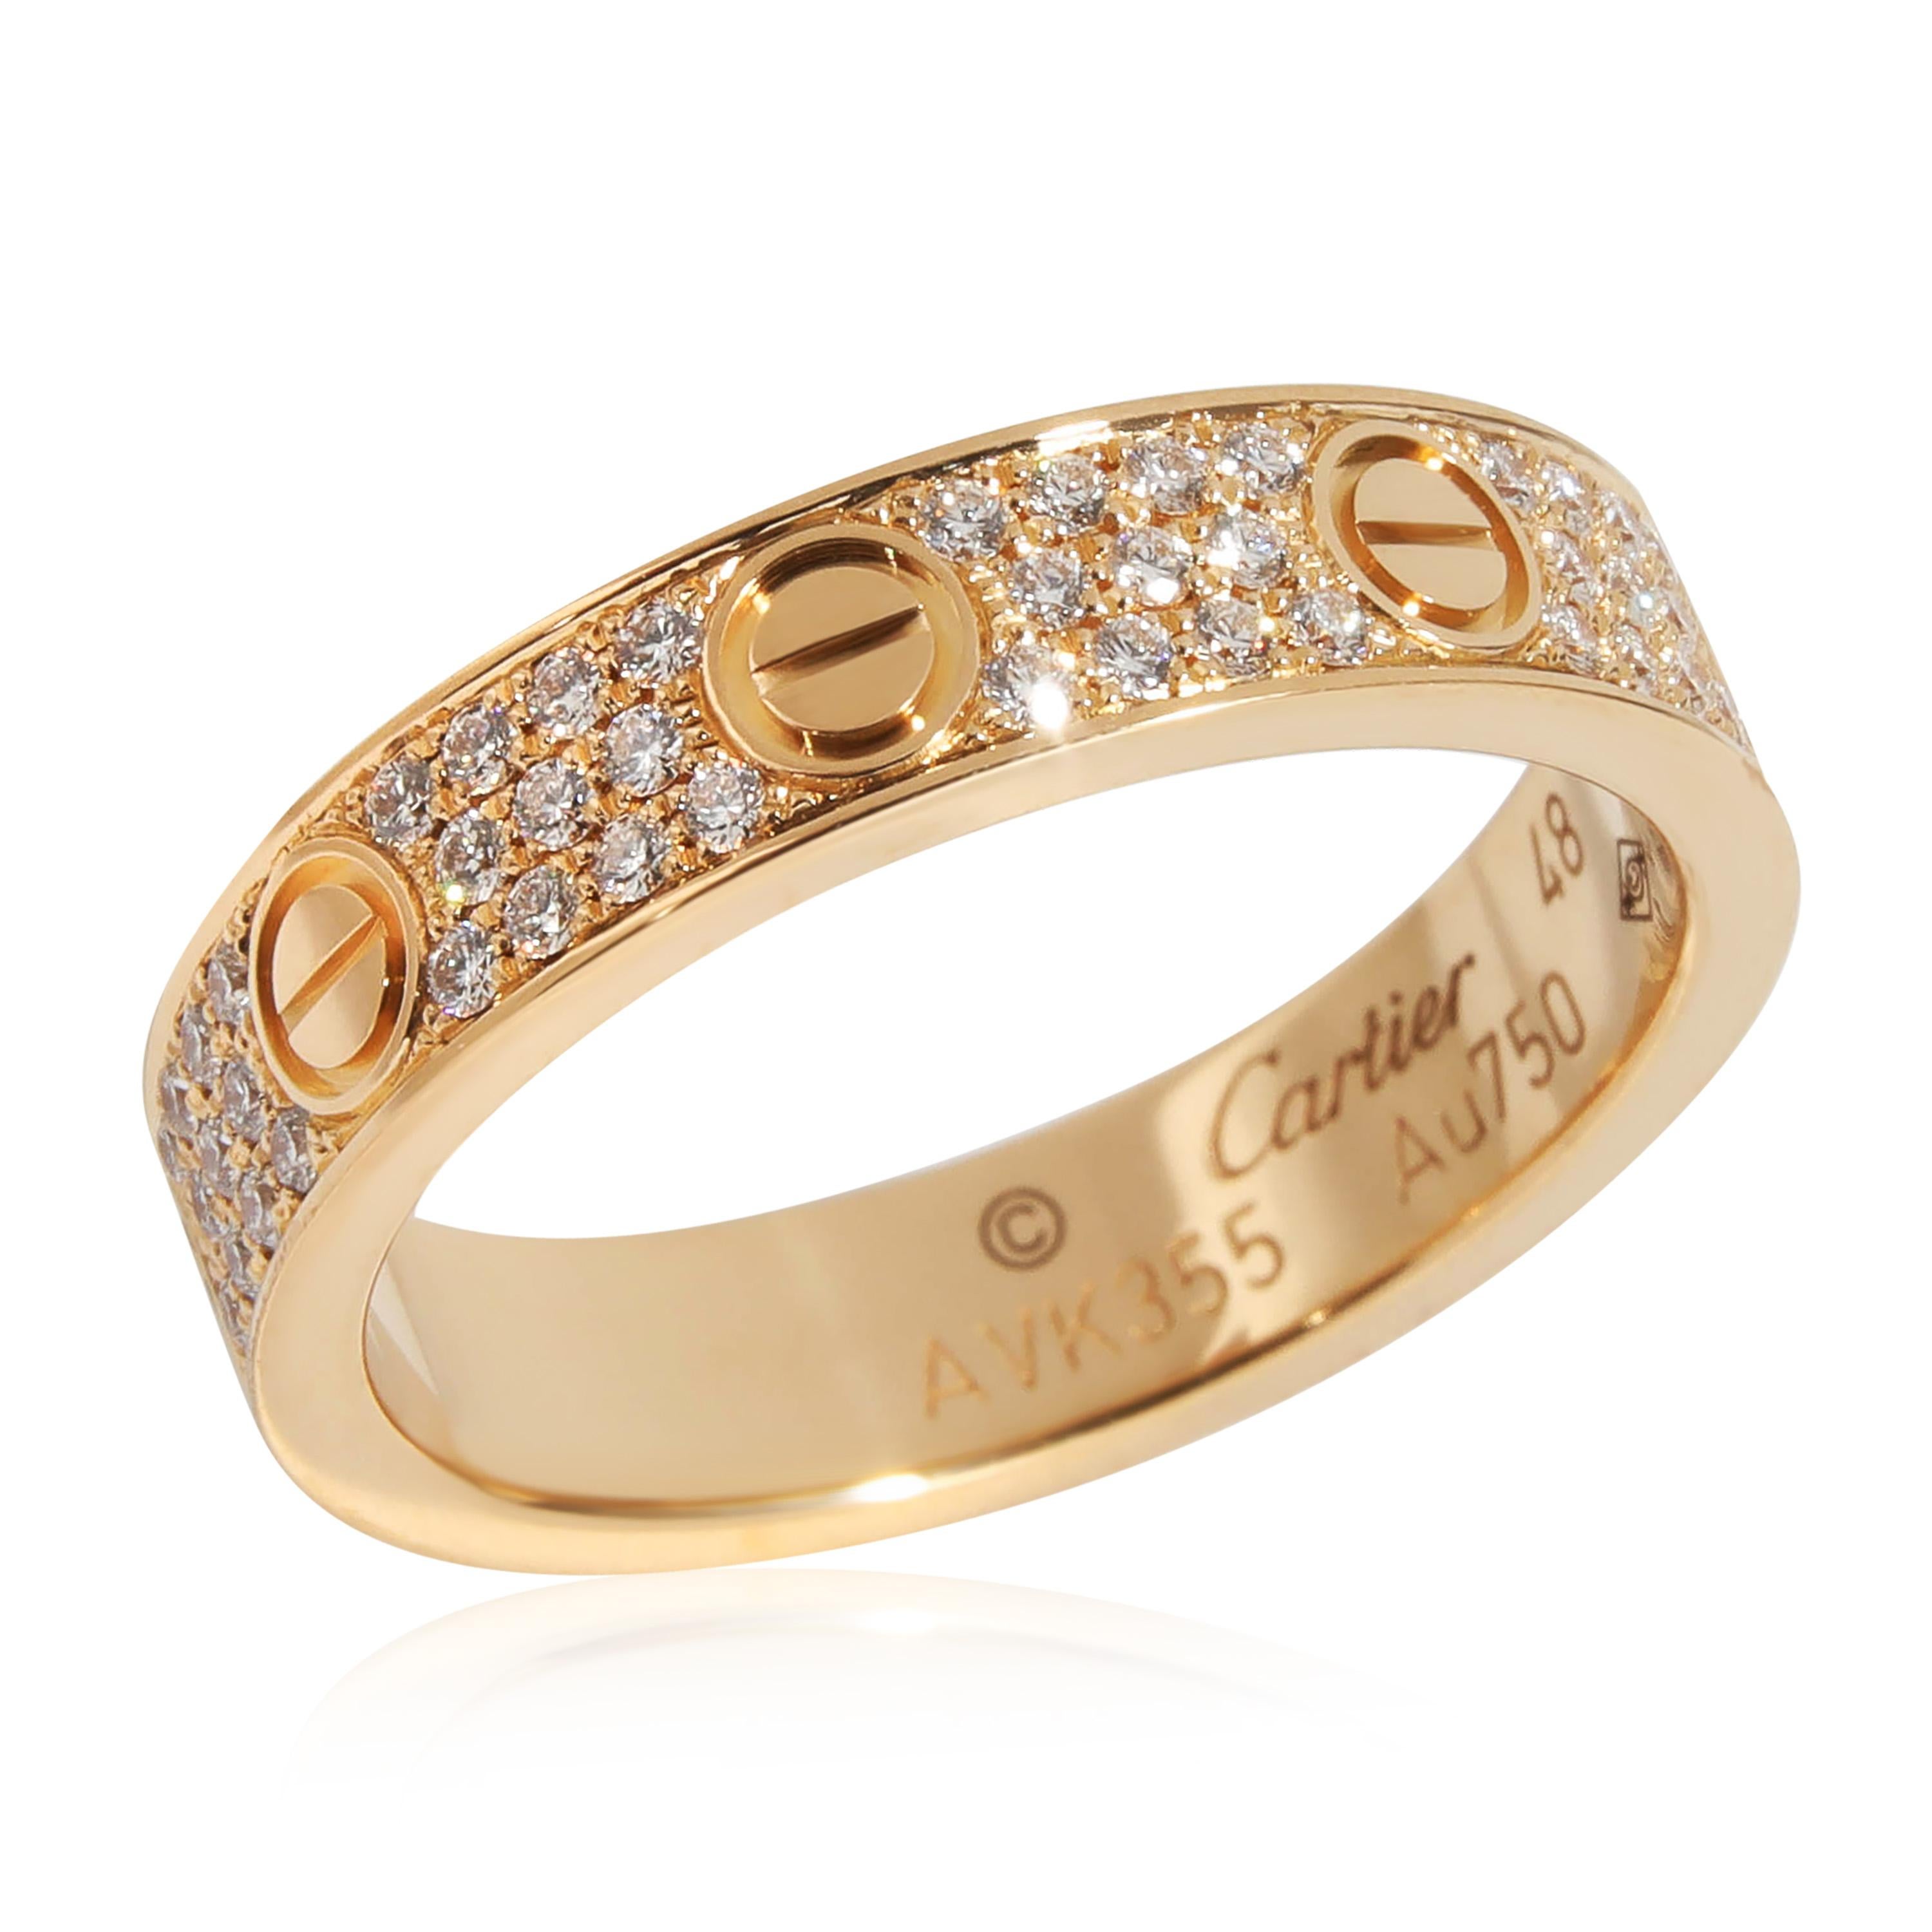 Cartier Love Diamond Ring in 18K Yellow Gold 0.31 CTW

PRIMARY DETAILS
SKU: 131350
Listing Title: Cartier Love Diamond Ring in 18K Yellow Gold 0.31 CTW
Condition Description: Cartier's Love collection is the epitome of iconic, from the recognizable